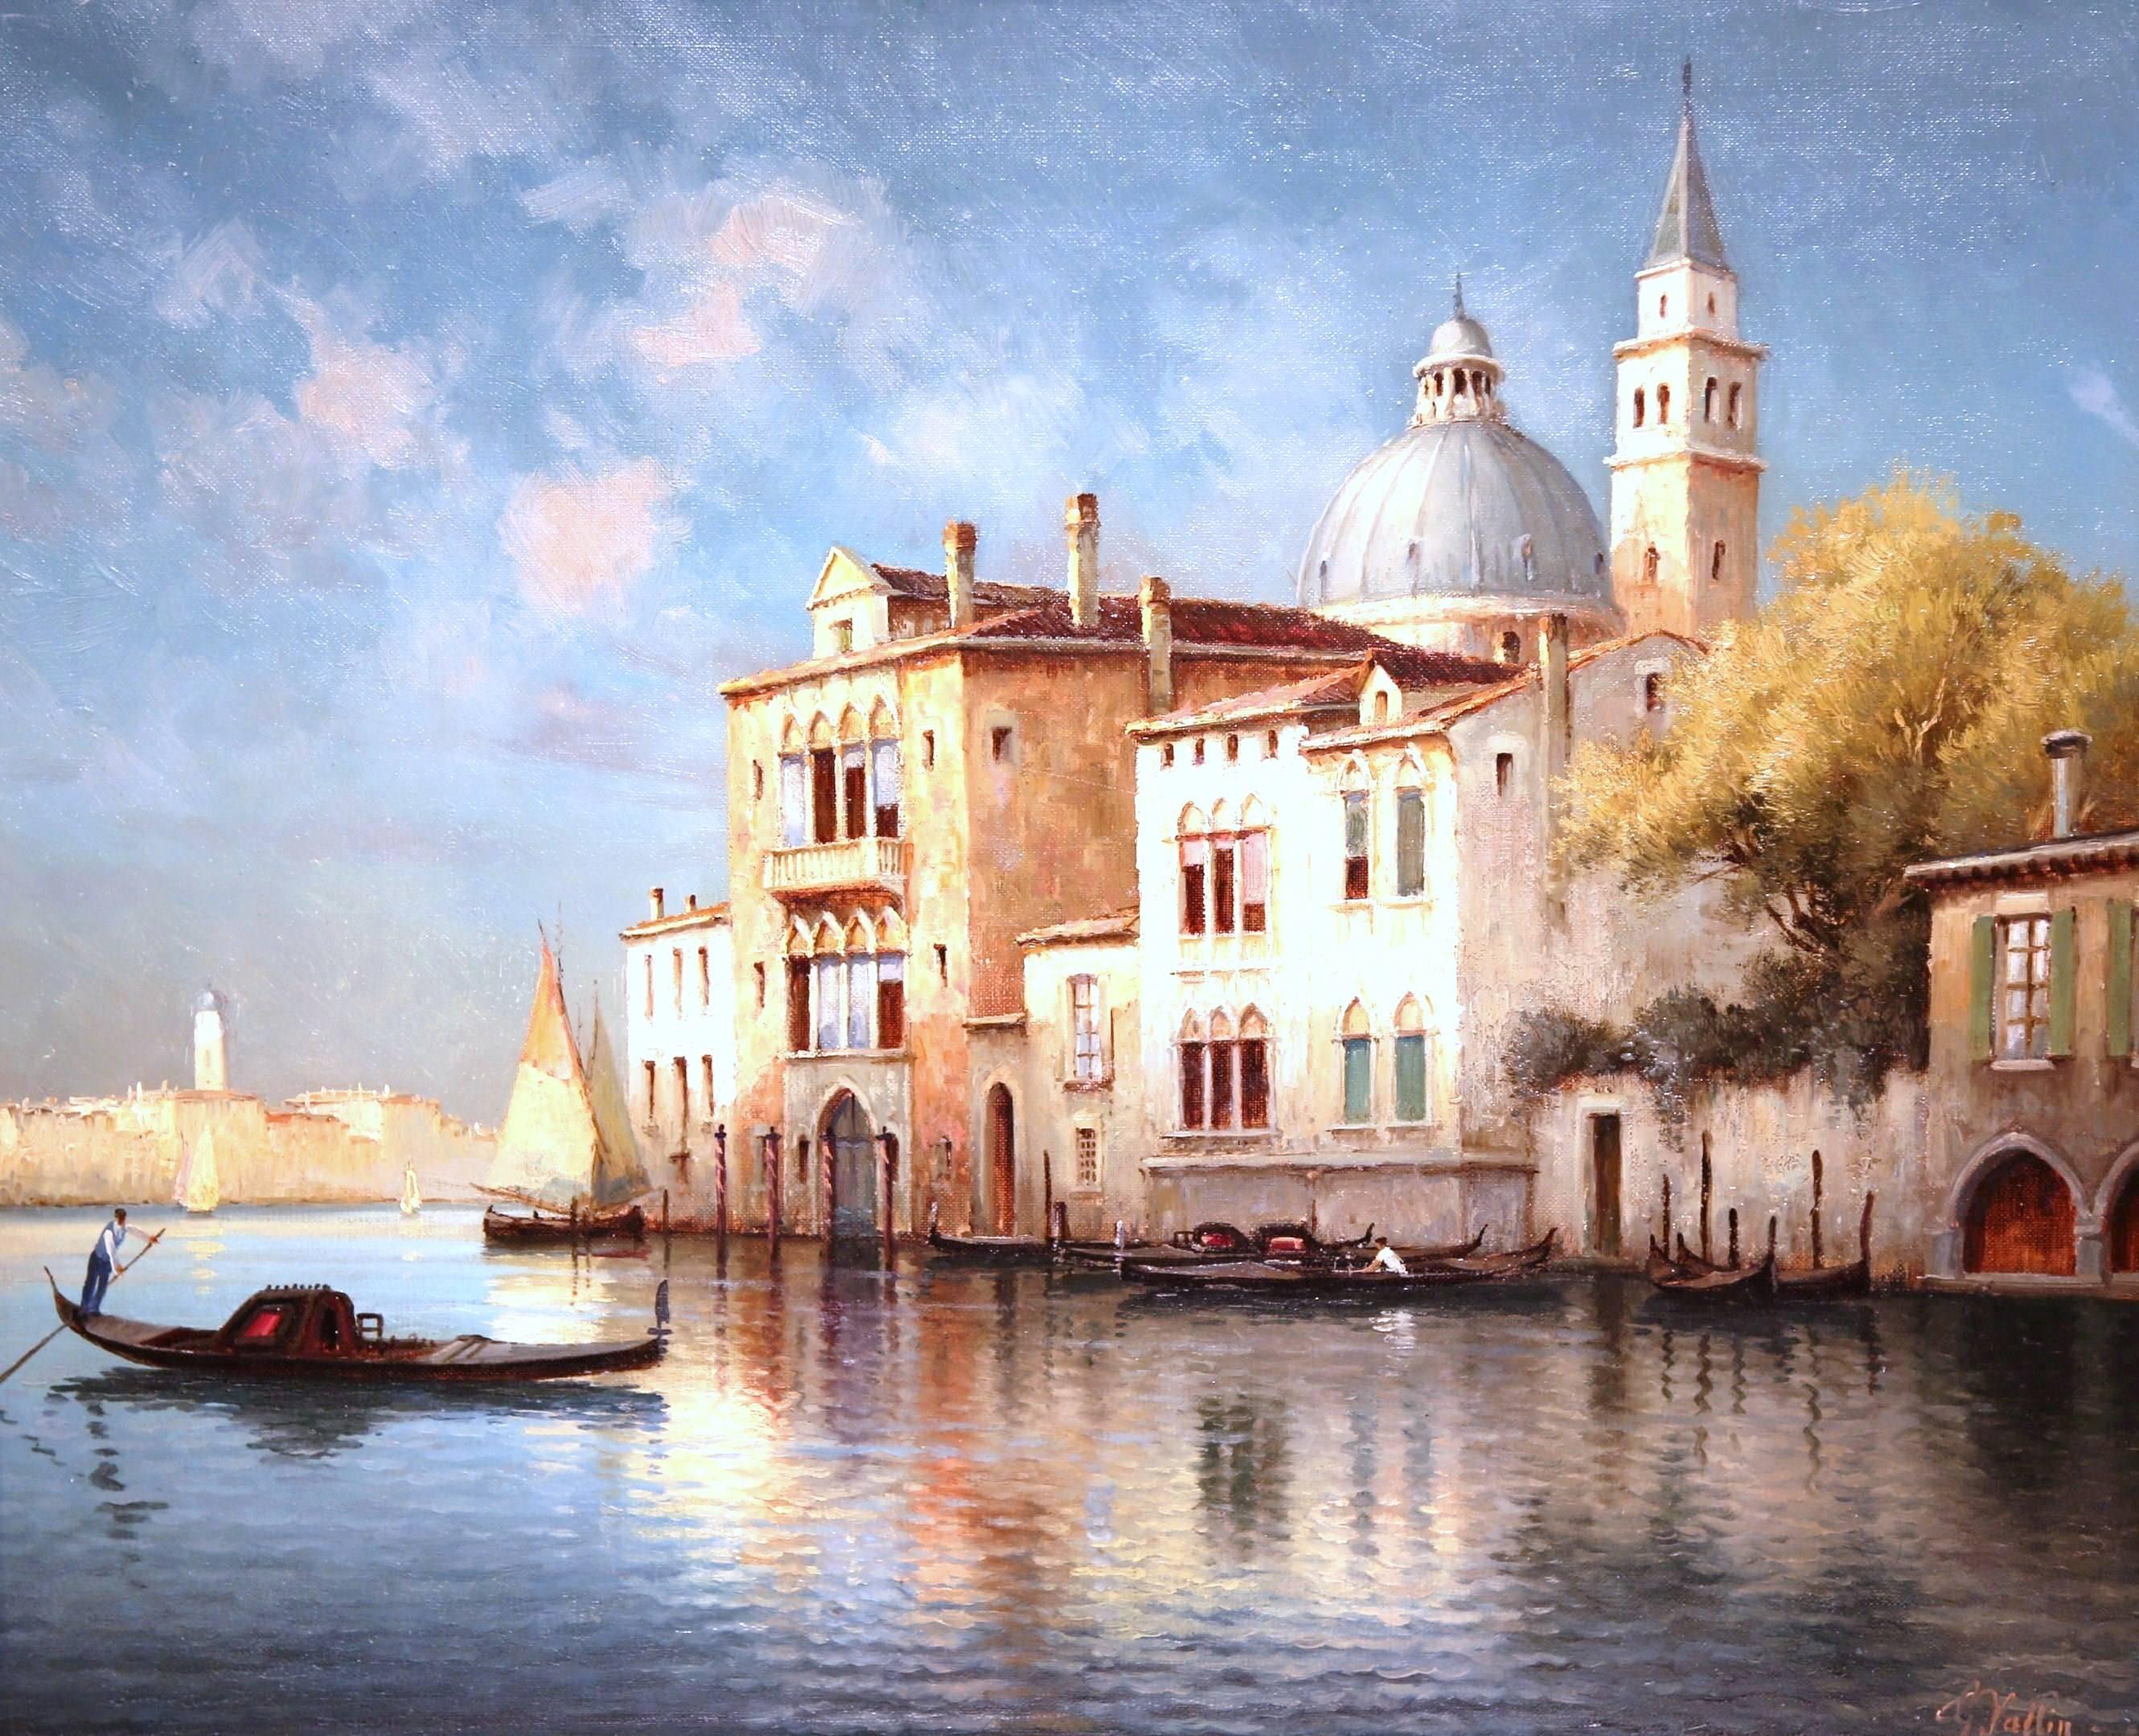 This beautiful, antique oil on canvas depicts an iconic Venetian scene. The painting is set inside a carved frame and is signed on the bottom right R. Vallin, a French artist known for his cityscapes of Venice, Italy and died in 1915. The